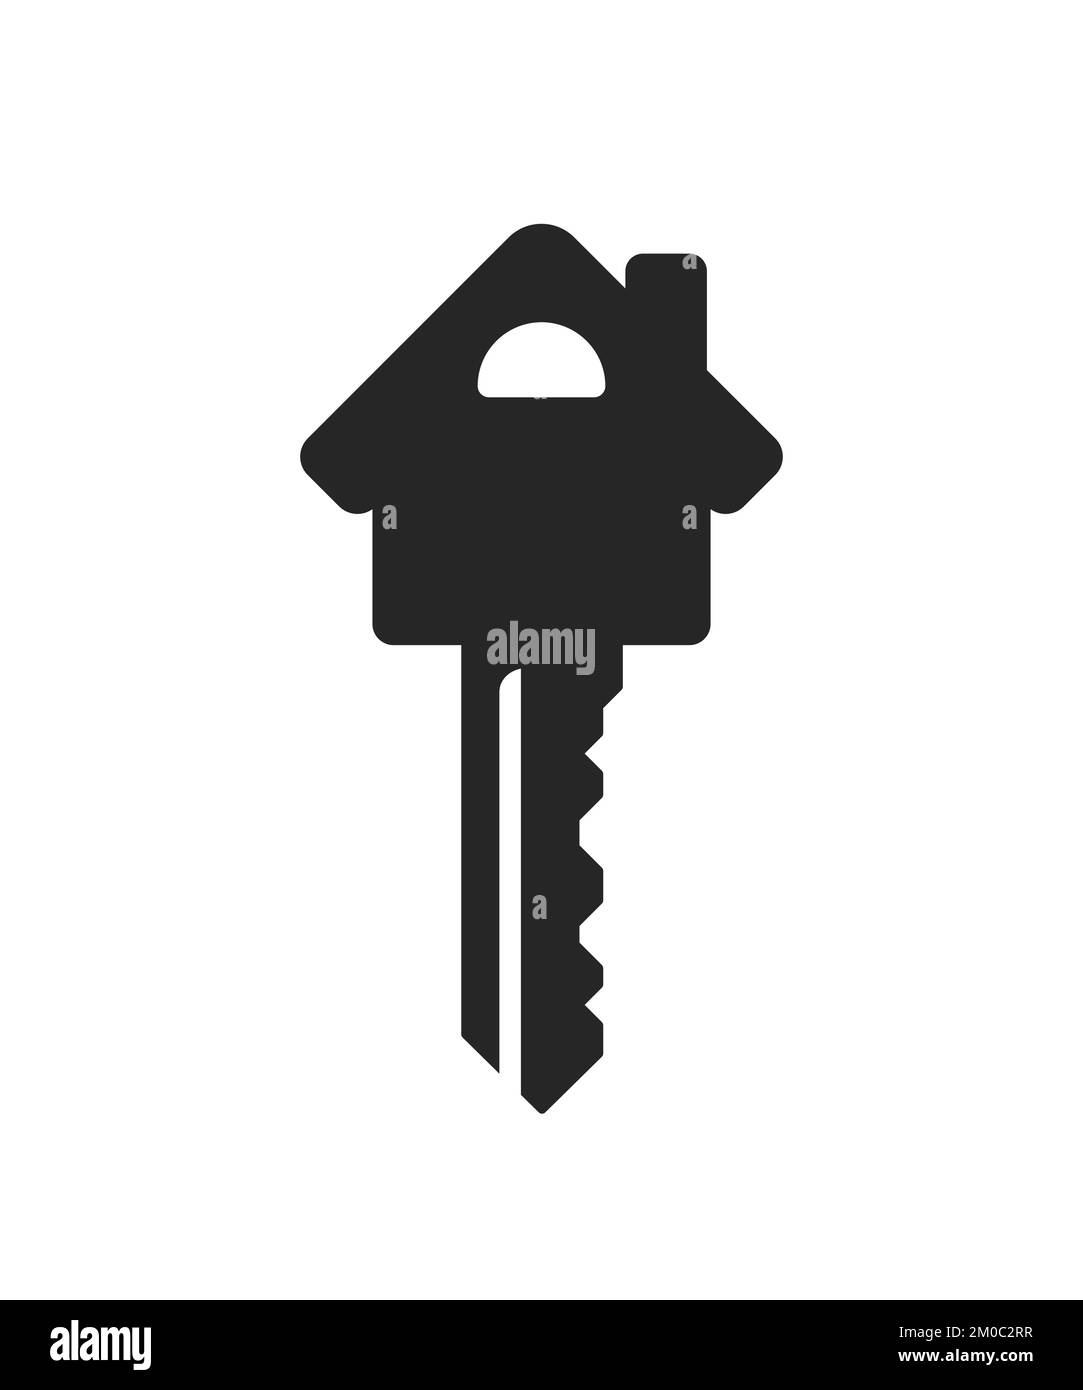 Silhouette of key with house shape. Vector icon or logo illustration. Estate concept with house and key. Stock Vector